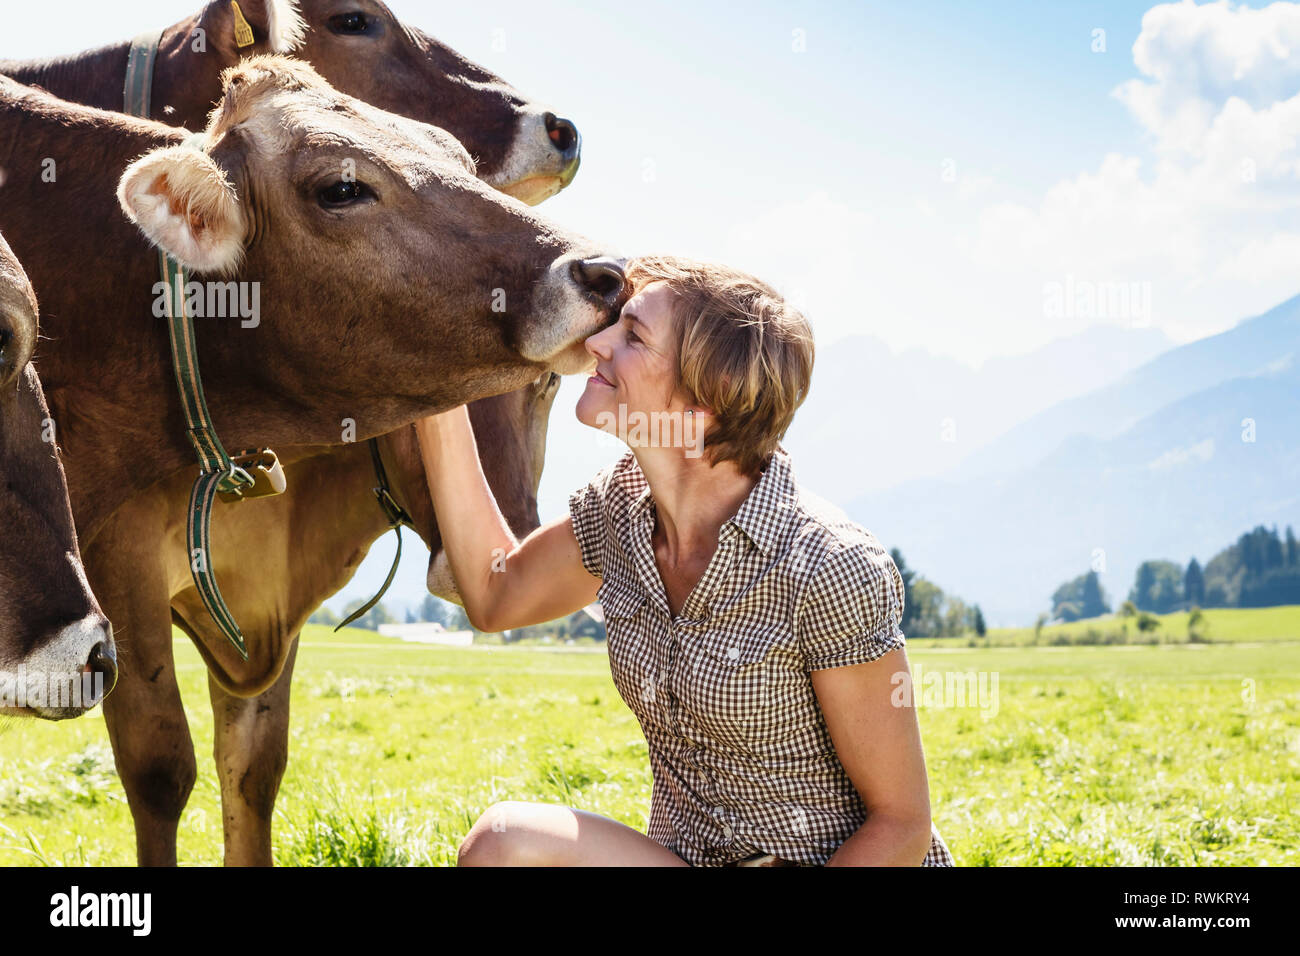 Woman bonding with herd of cows on field, Sonthofen, Bayern, Germany Stock Photo